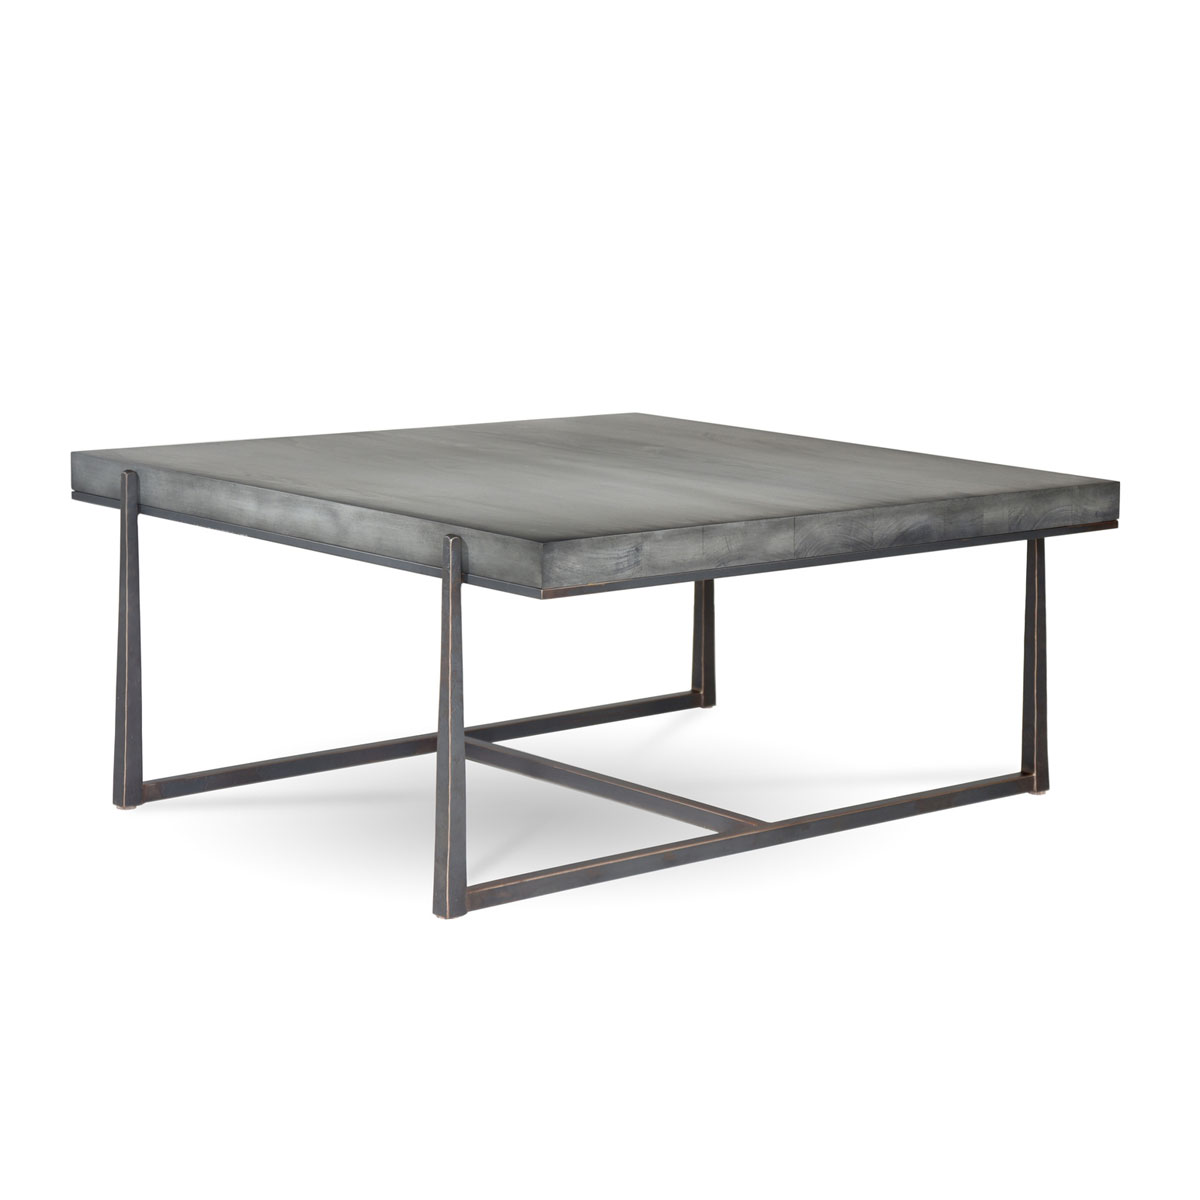 Charleston Forge Cooper 42 inch Square Cocktail Table